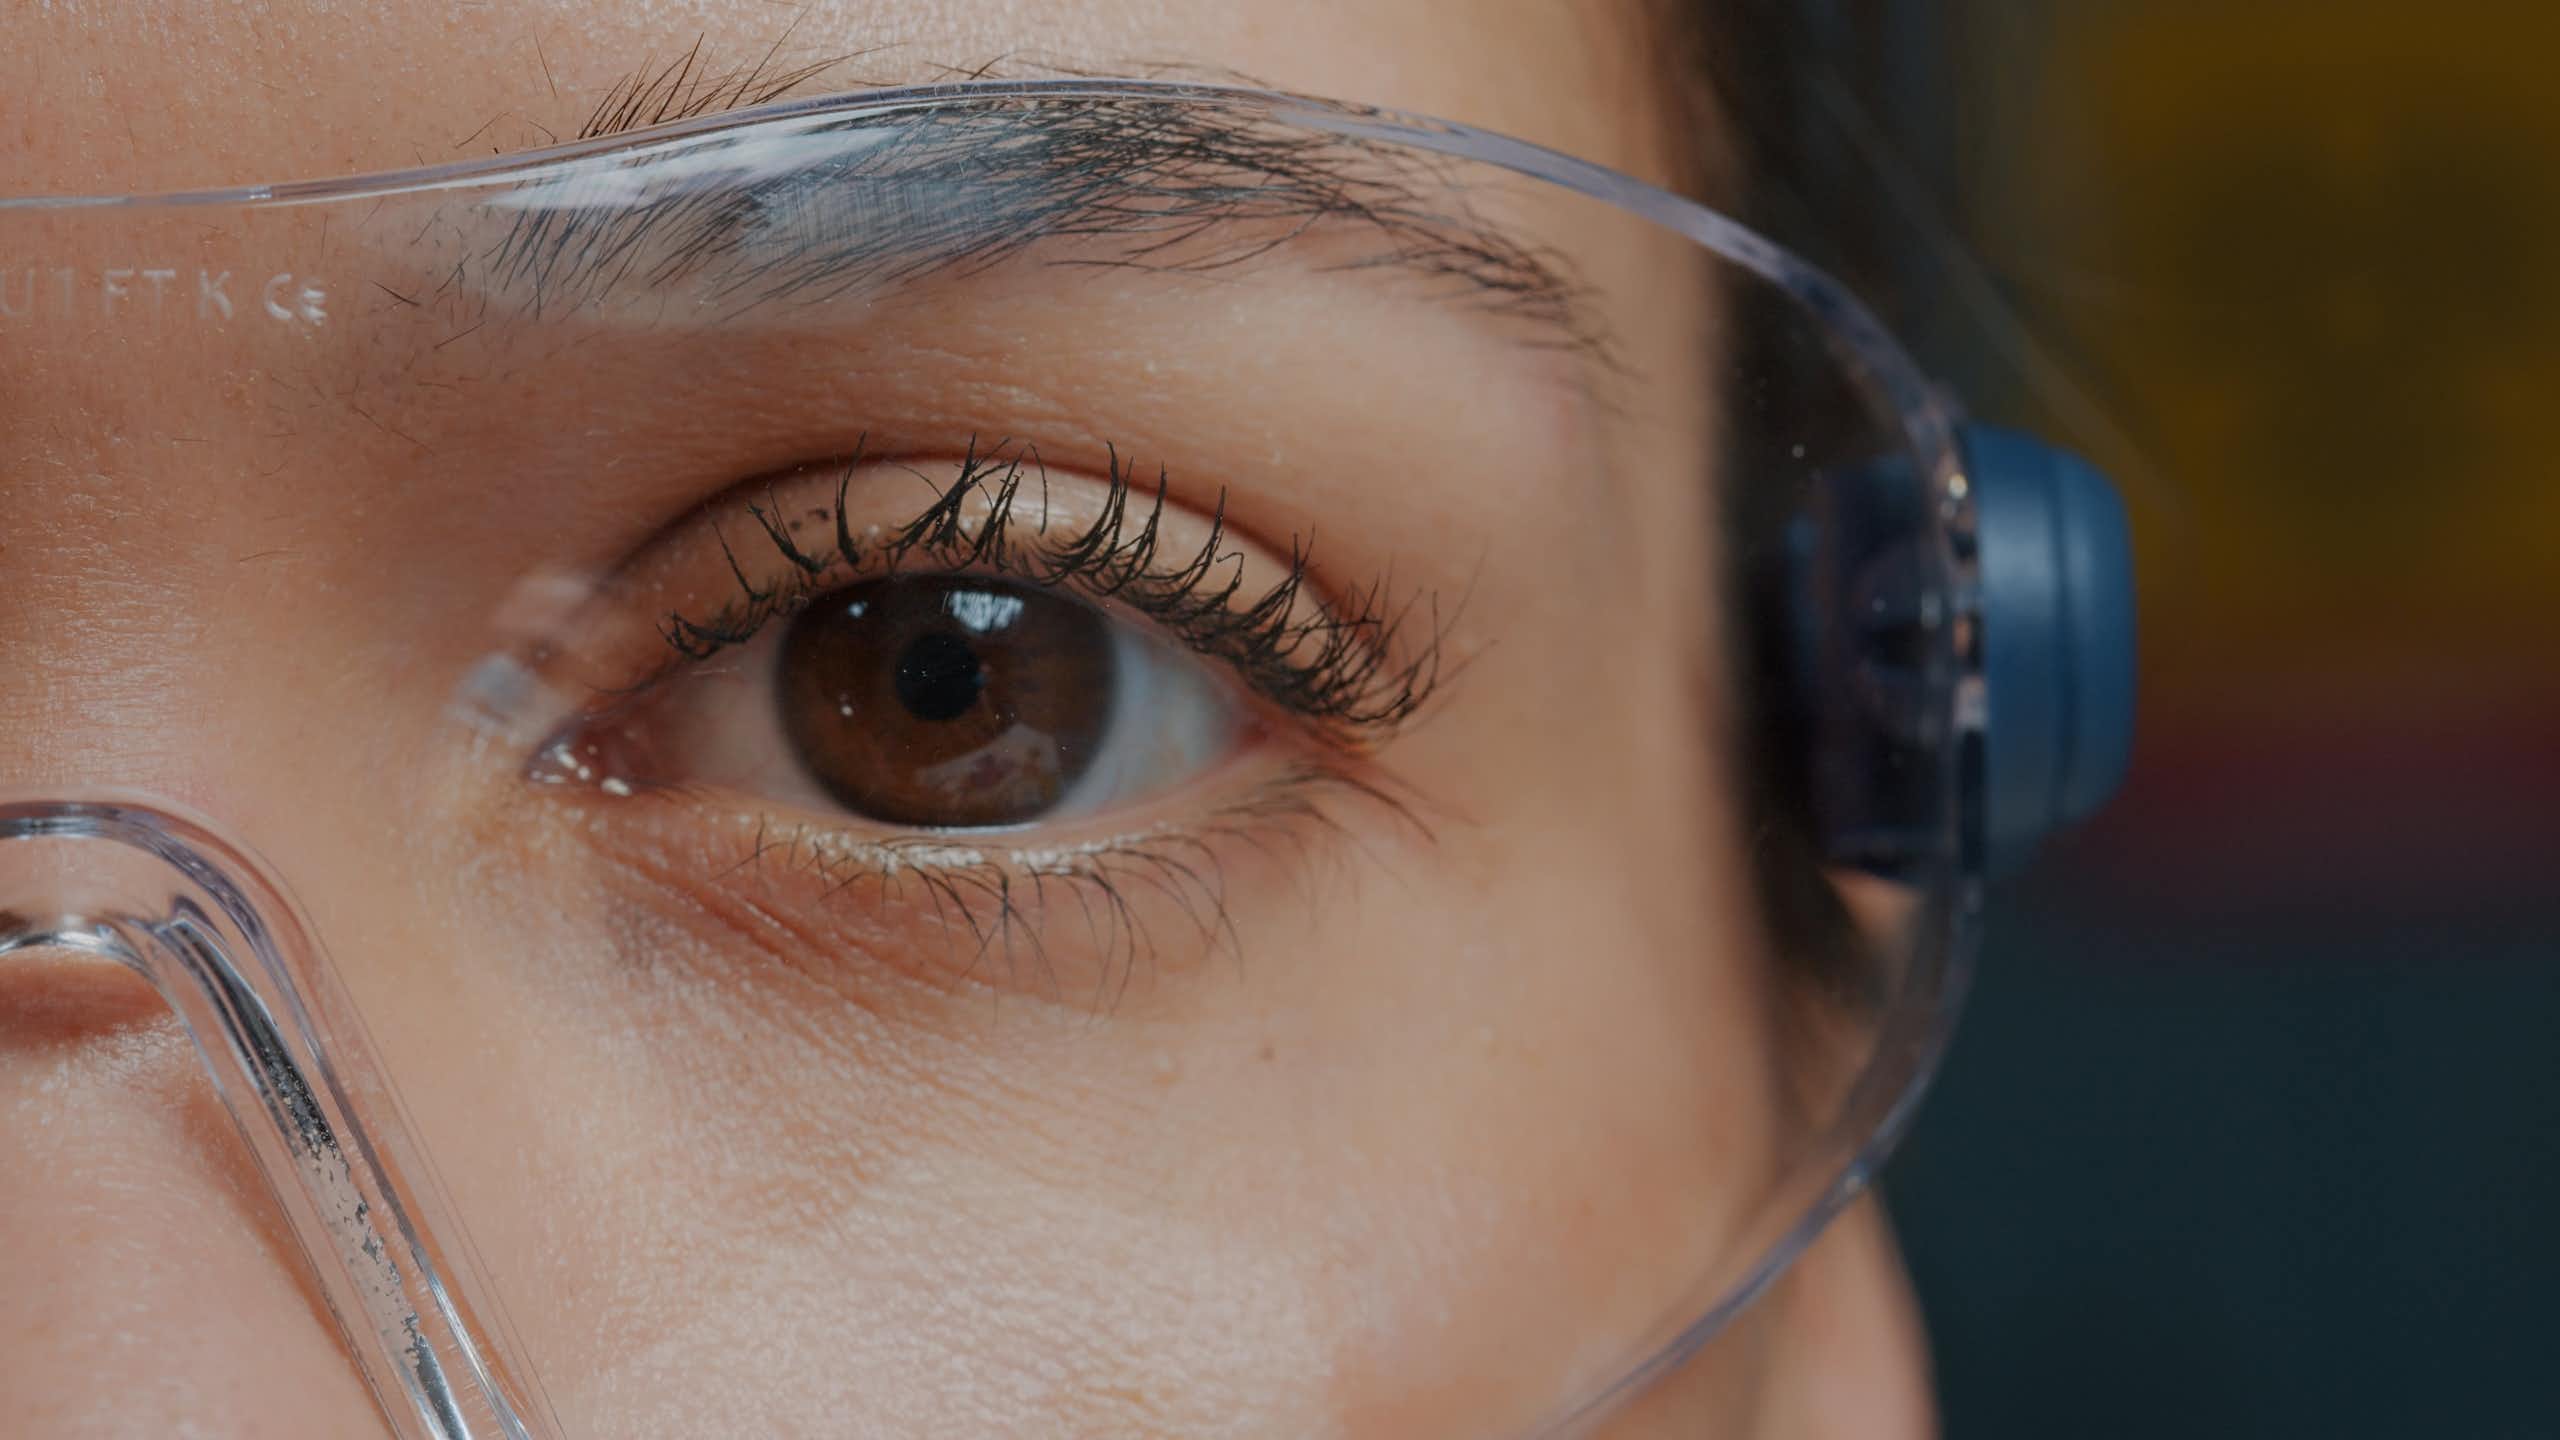 Photo of a woman's eye behind safety goggles.